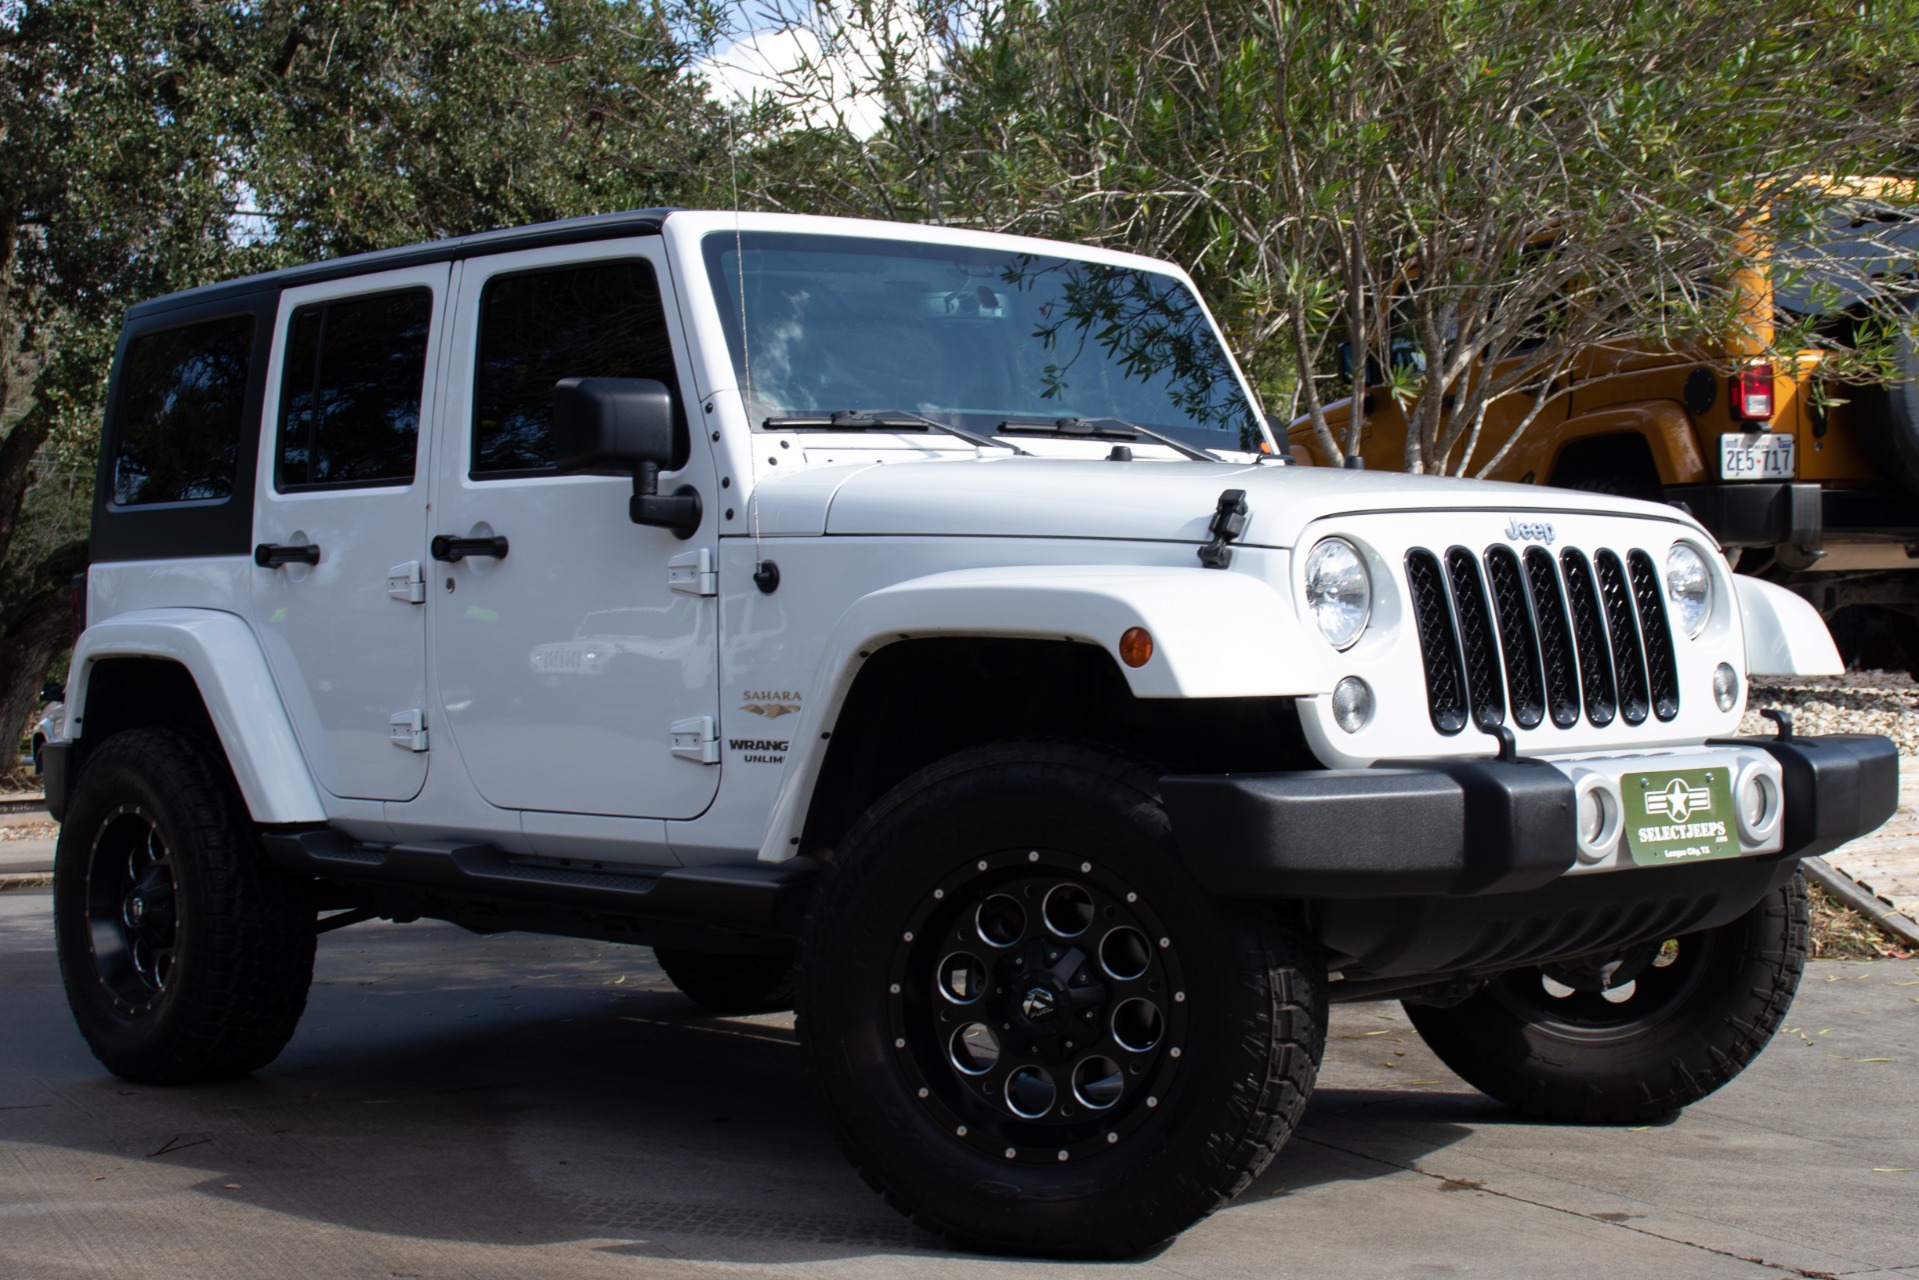 Used 2015 Jeep Wrangler Unlimited Sahara For Sale ($28,995) | Select Jeeps  Inc. Stock #528442